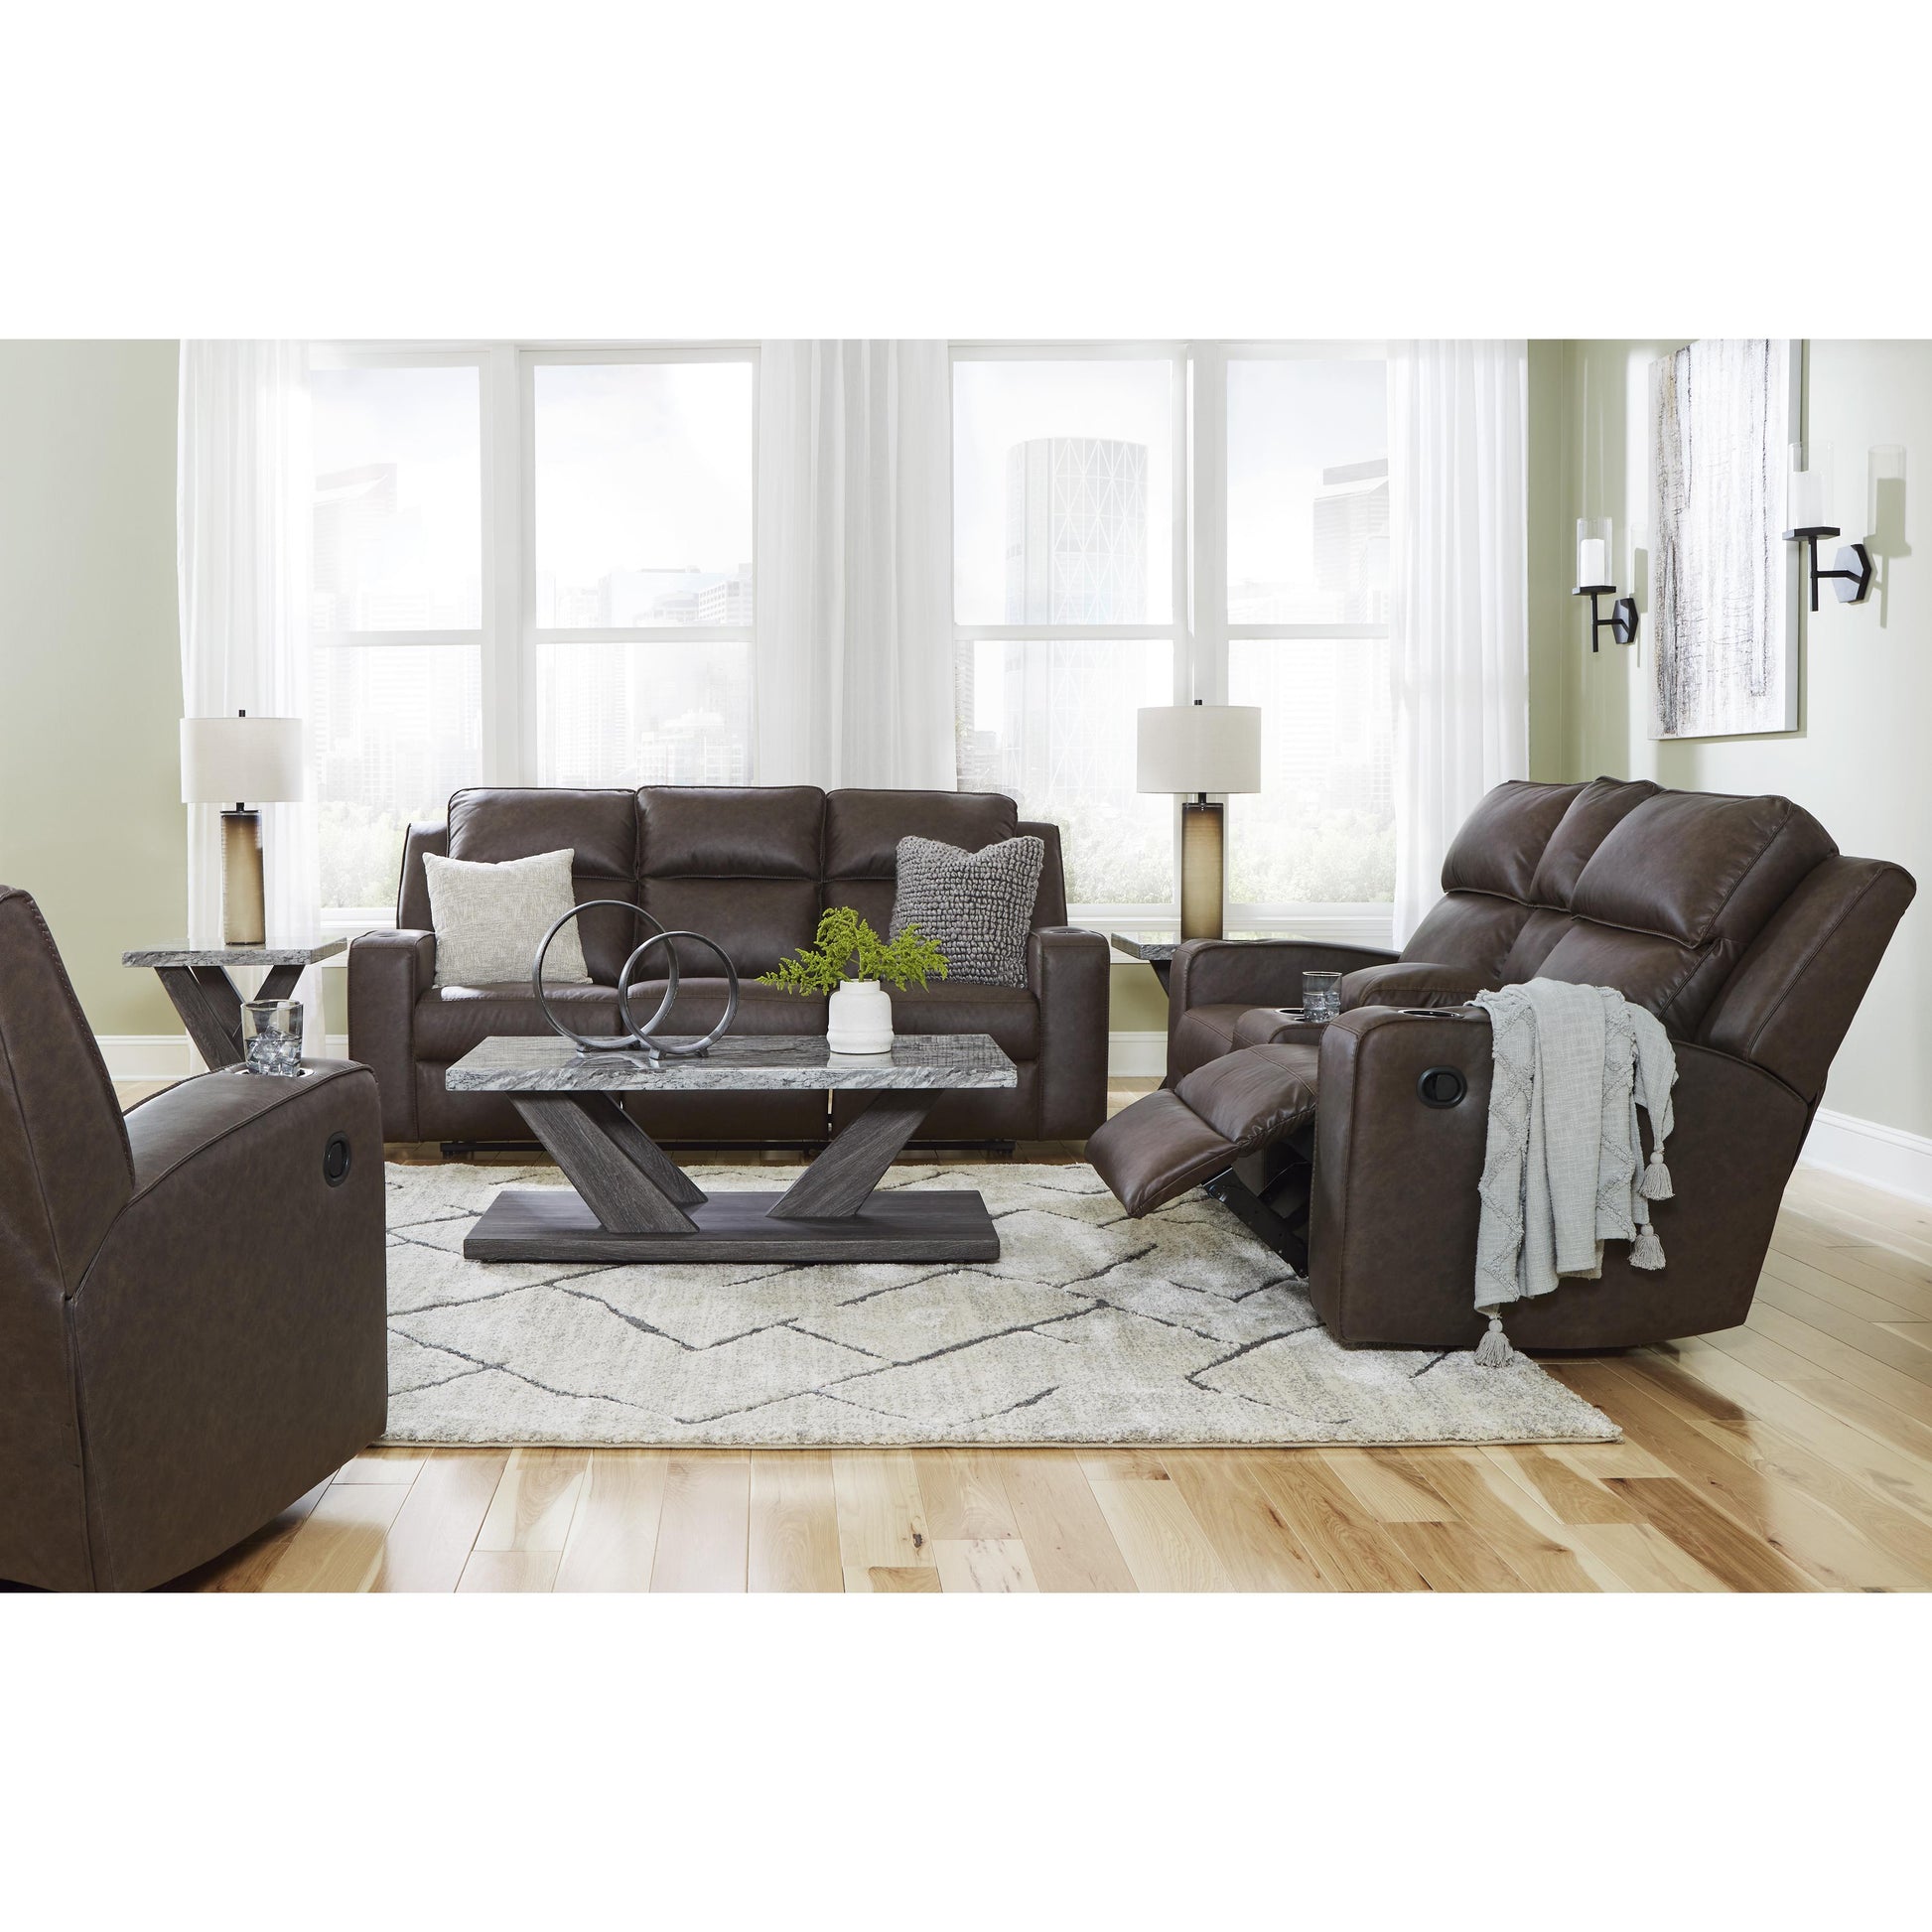 Signature Design by Ashley Lavenhorne Reclining Leather Look Loveseat 6330694 IMAGE 16